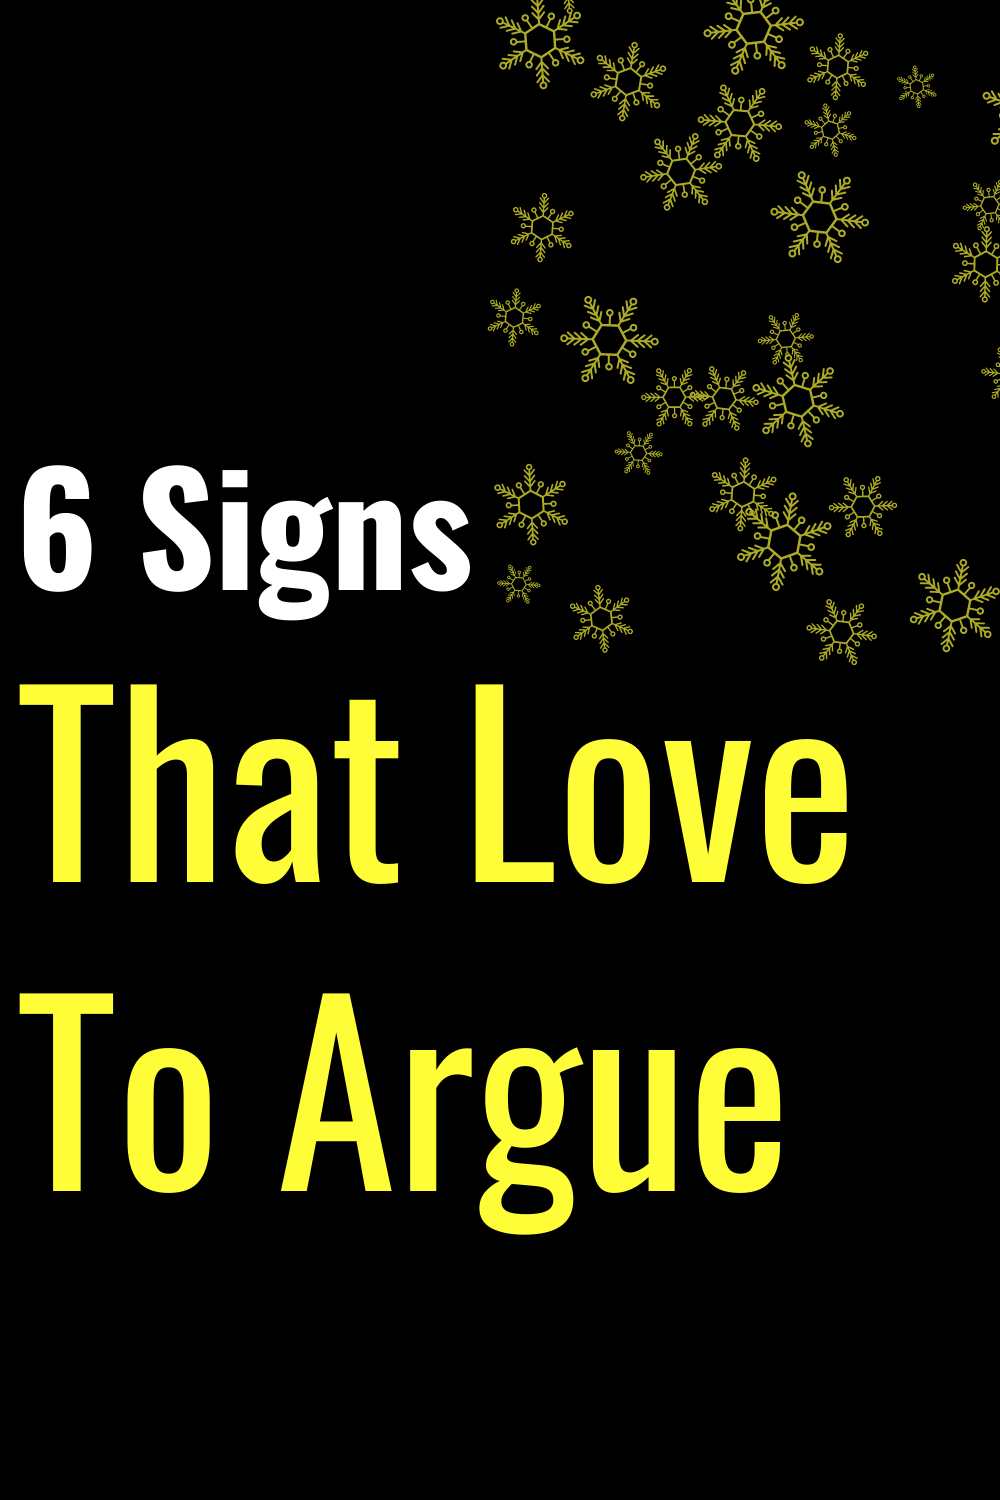 6 Signs That Love To Argue